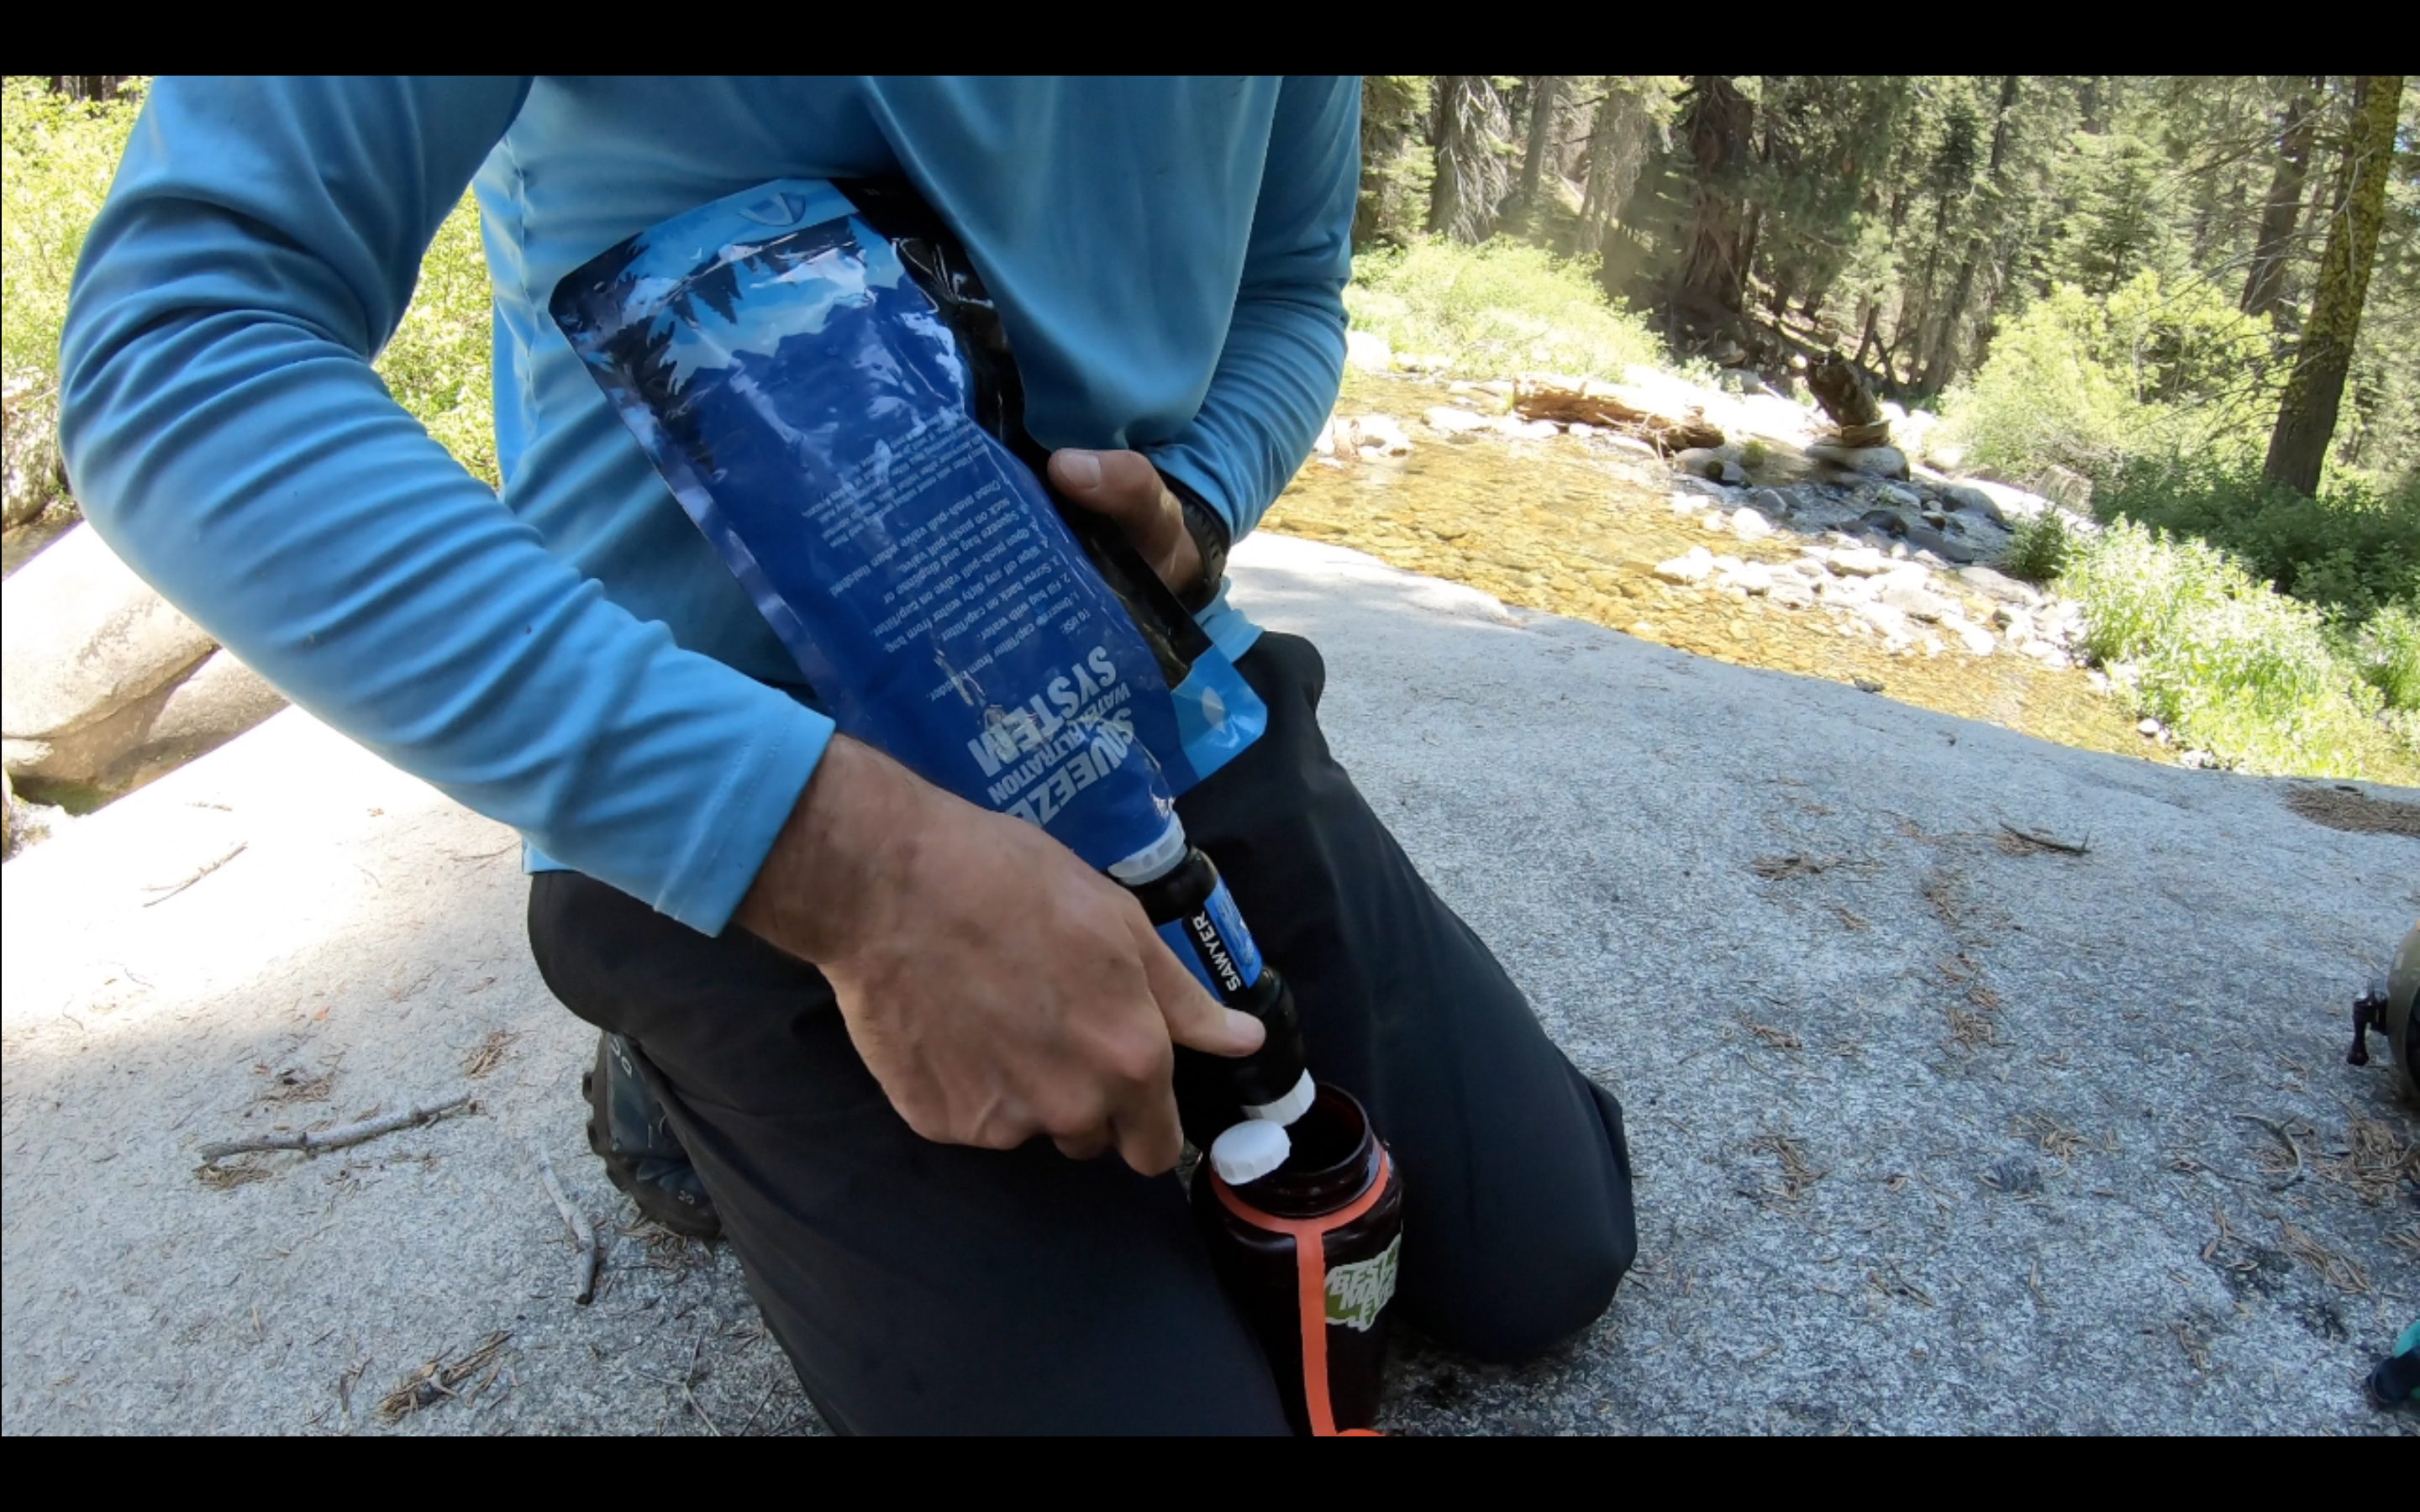 WHY DO WE CARRY A WATER FILTER  ON A DAY HIKE?